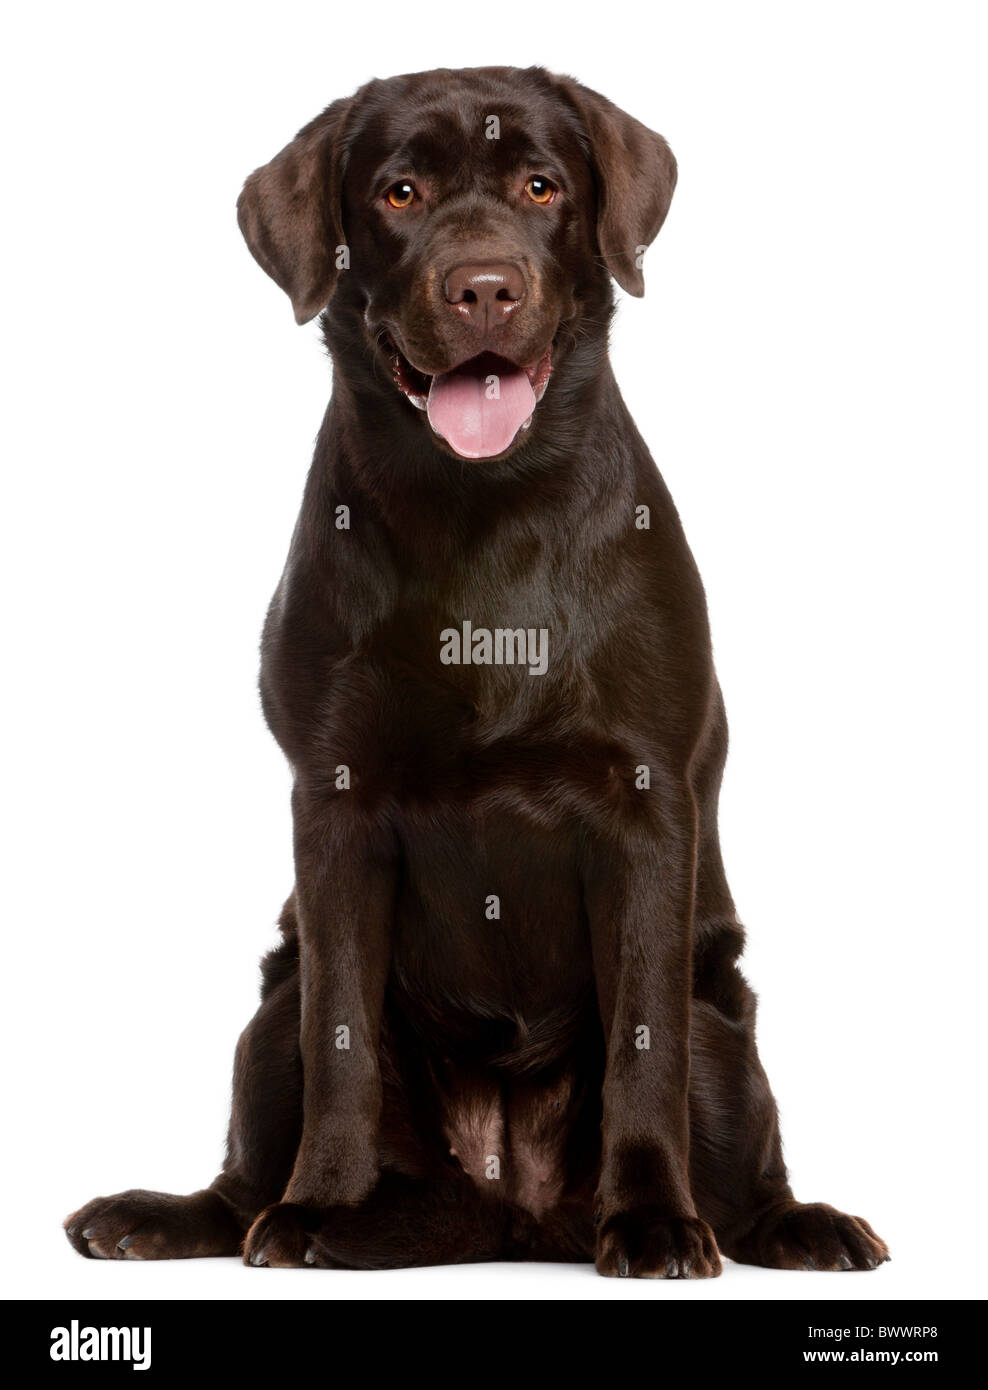 Labrador Retriever, 7 months old, sitting in front of white background Stock Photo